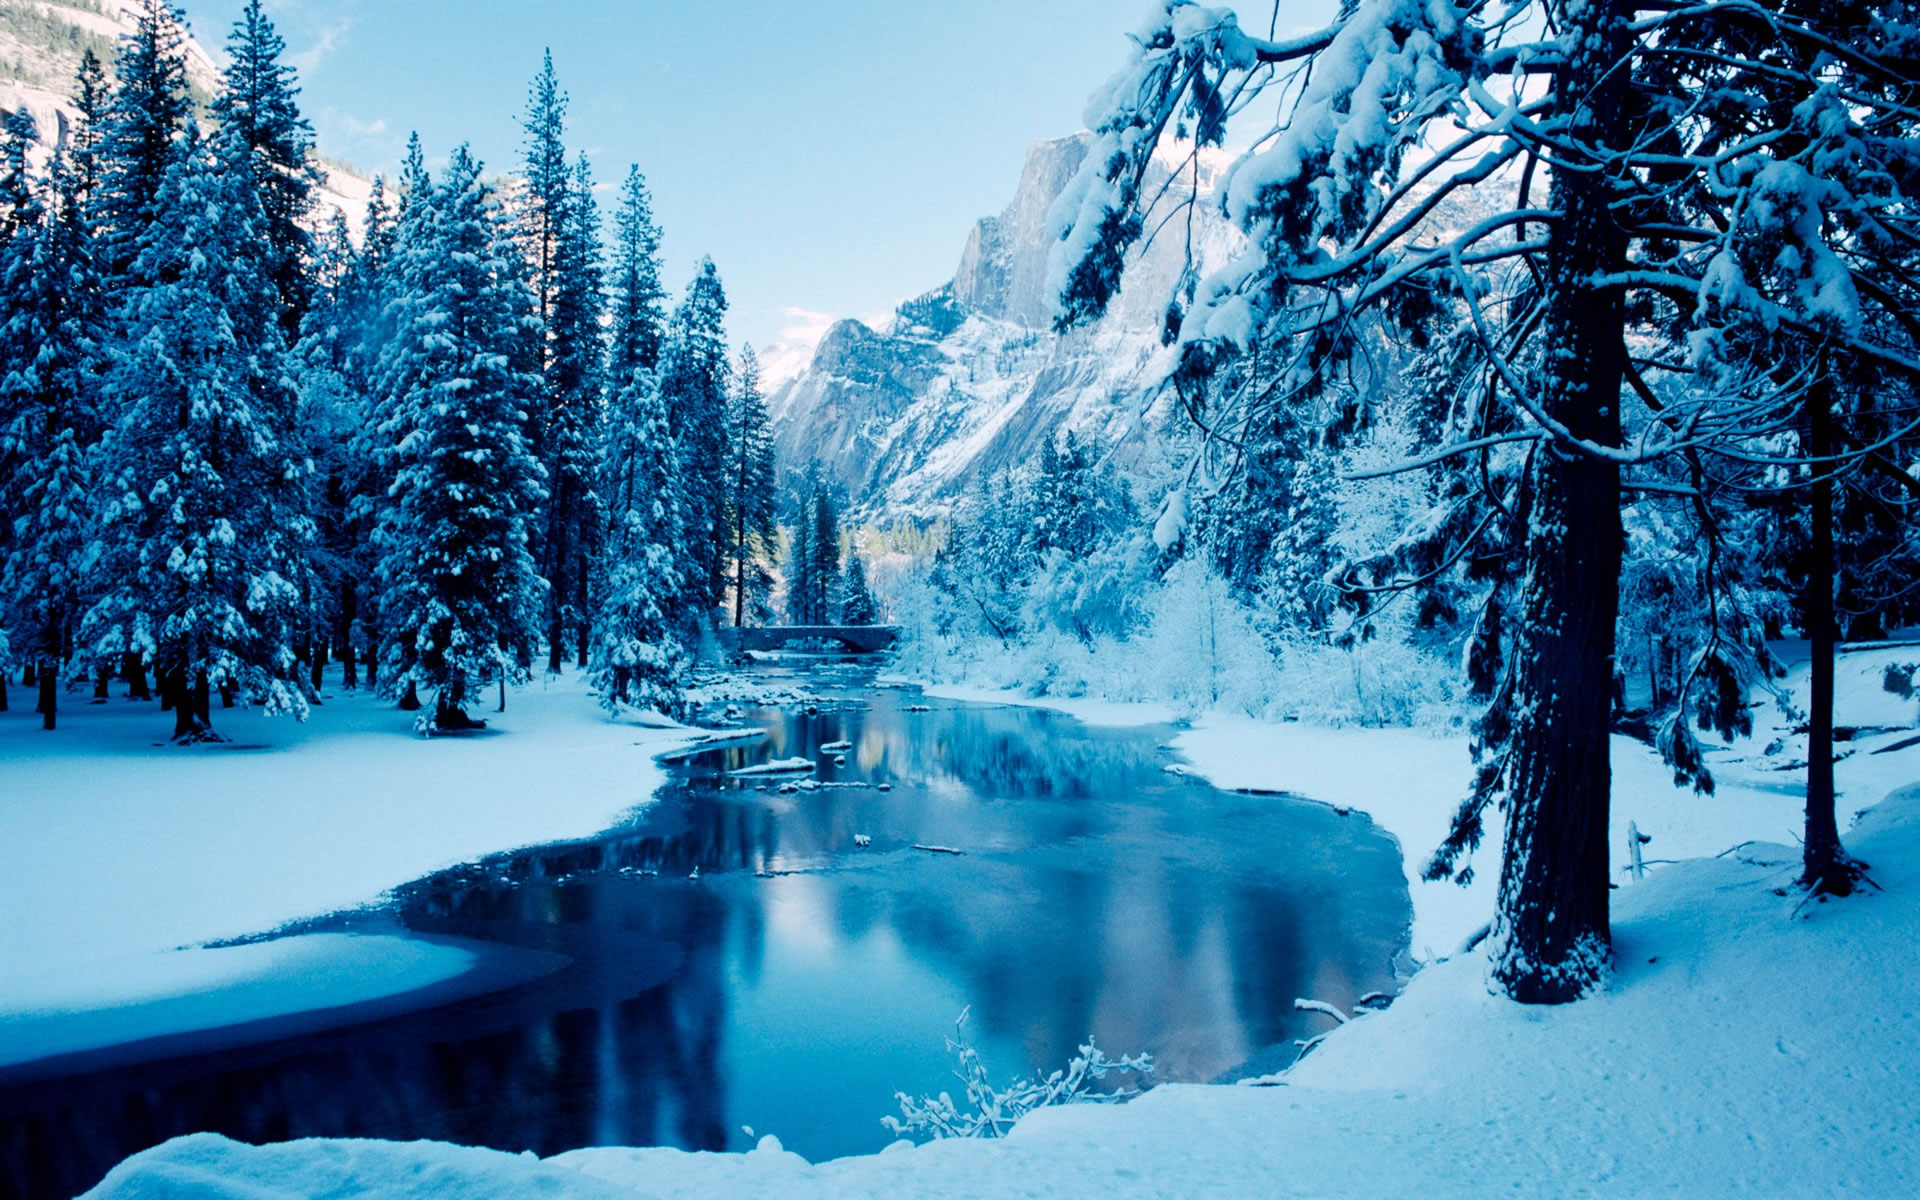 Winter background images